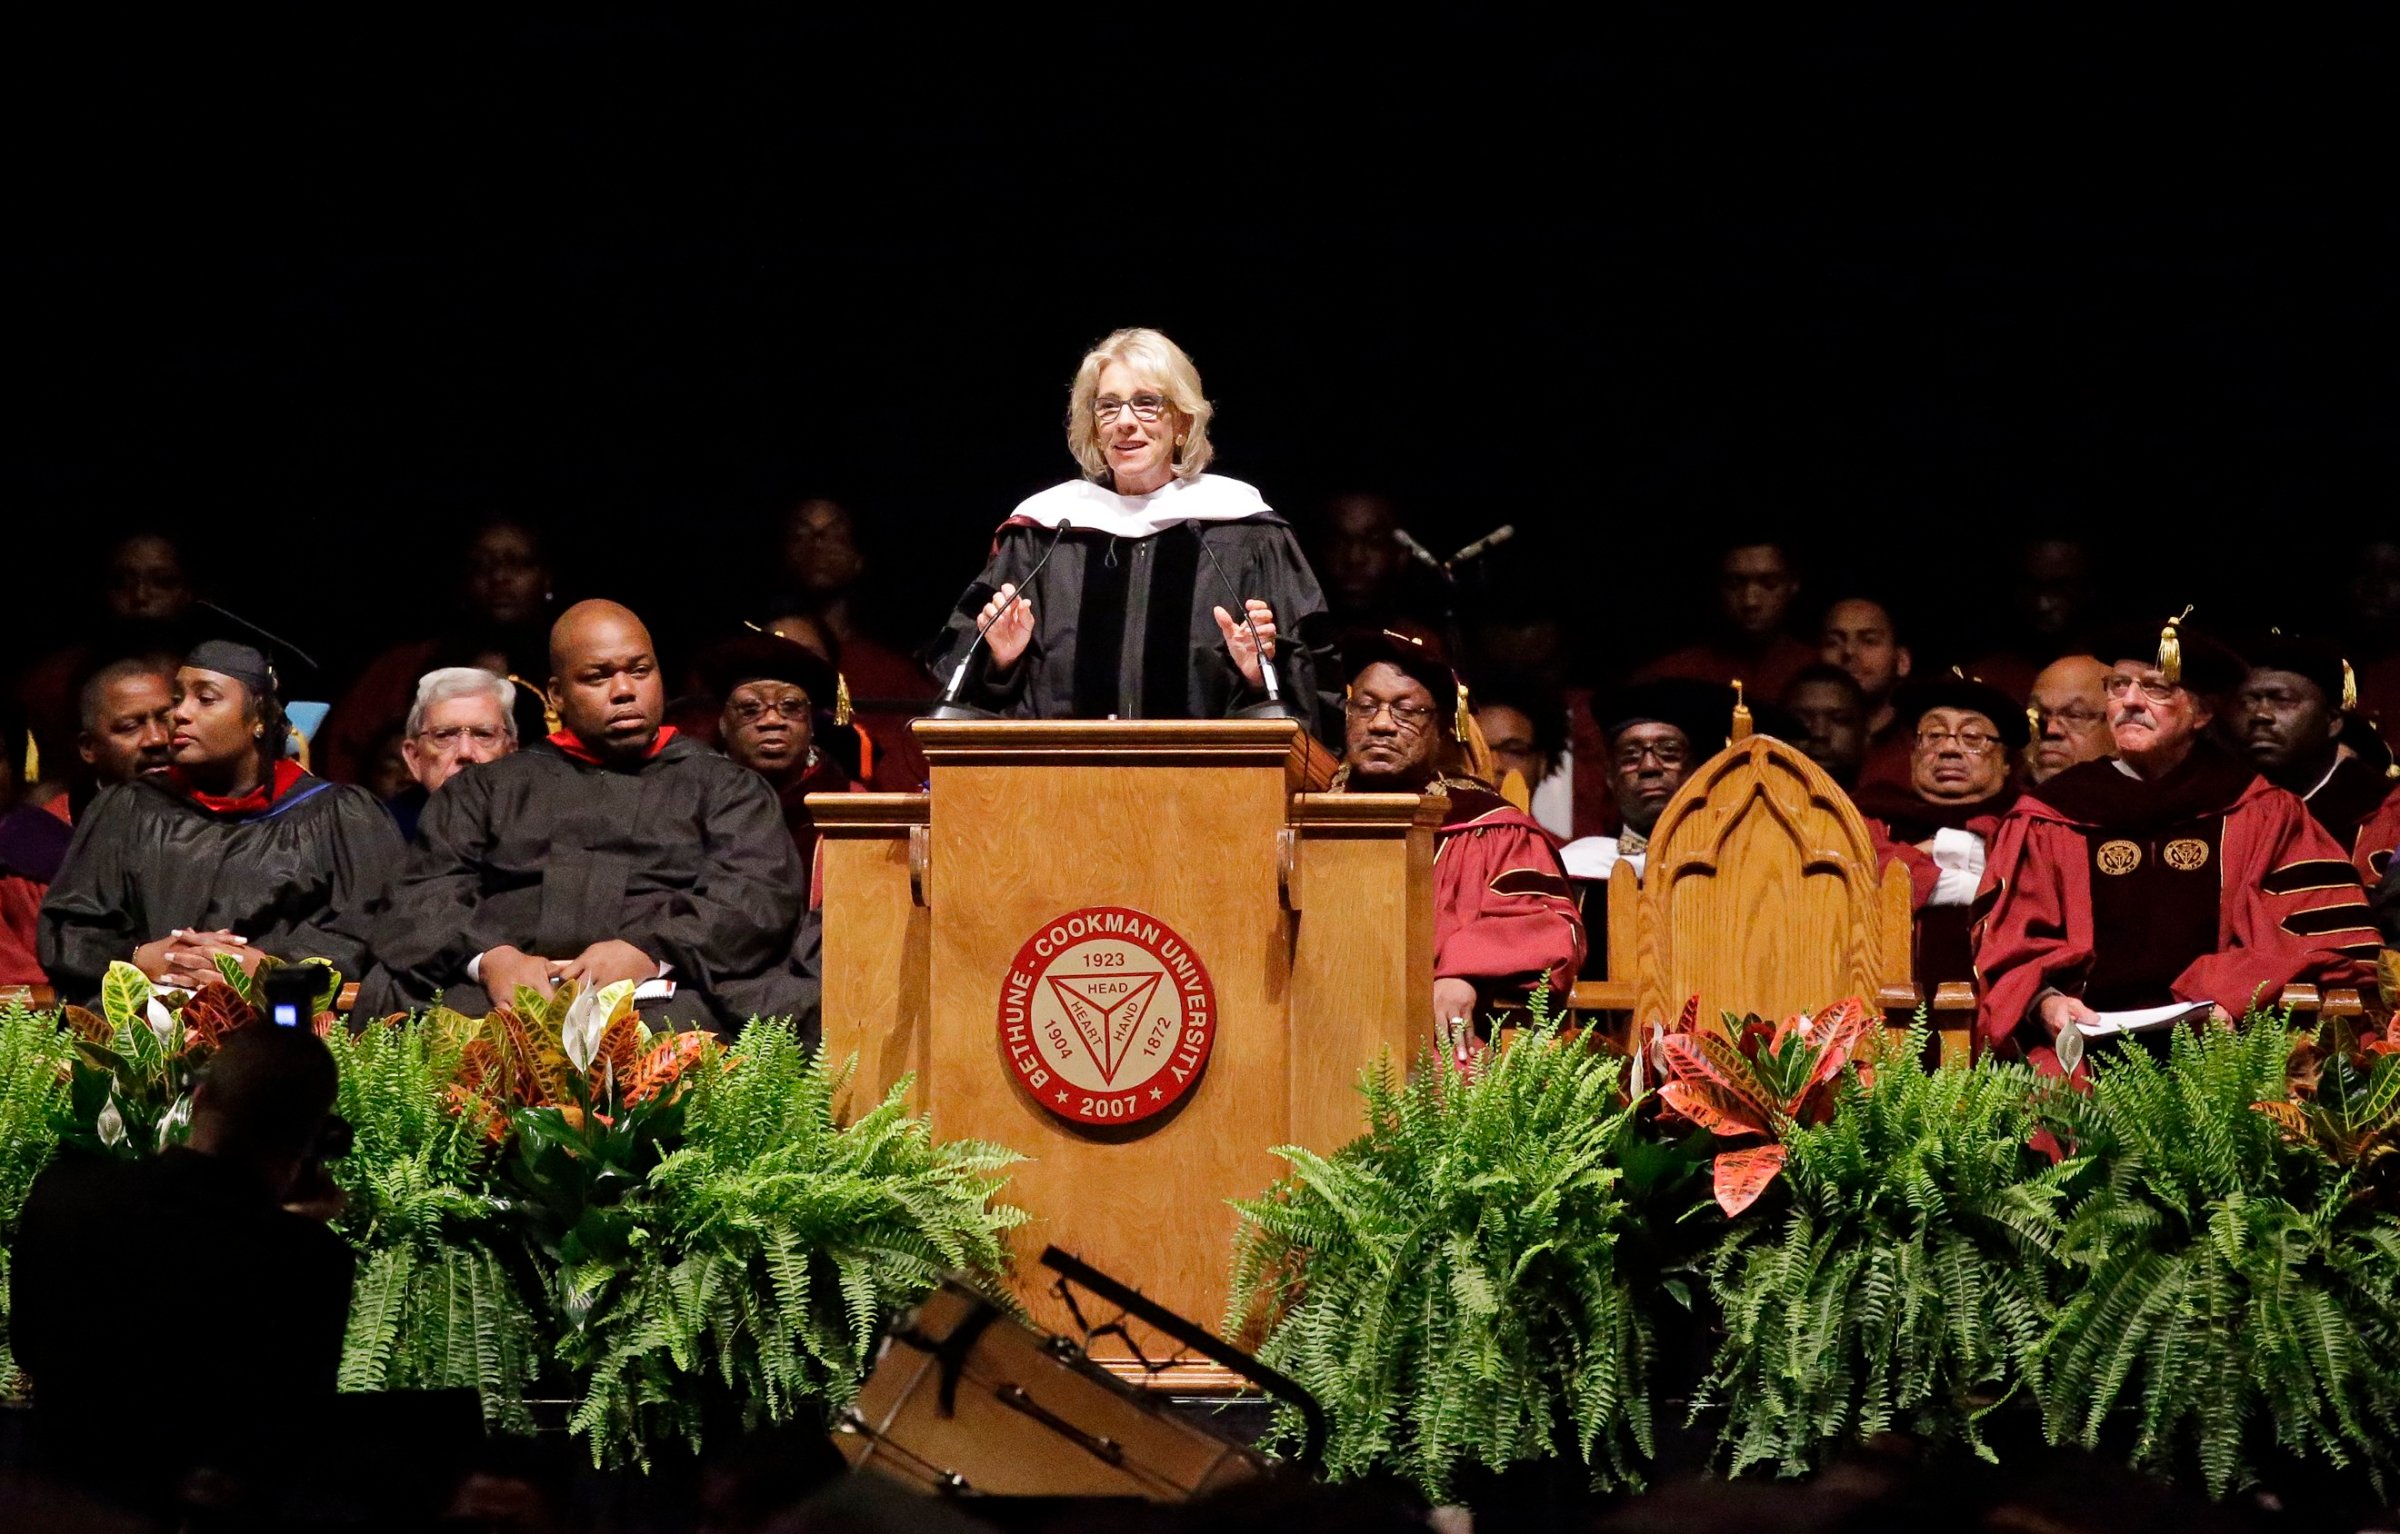 Education Secretary Betsy DeVos delivers a commencement address to graduates at Bethune-Cookman University on May 10, 2017, in Daytona Beach, Fla.